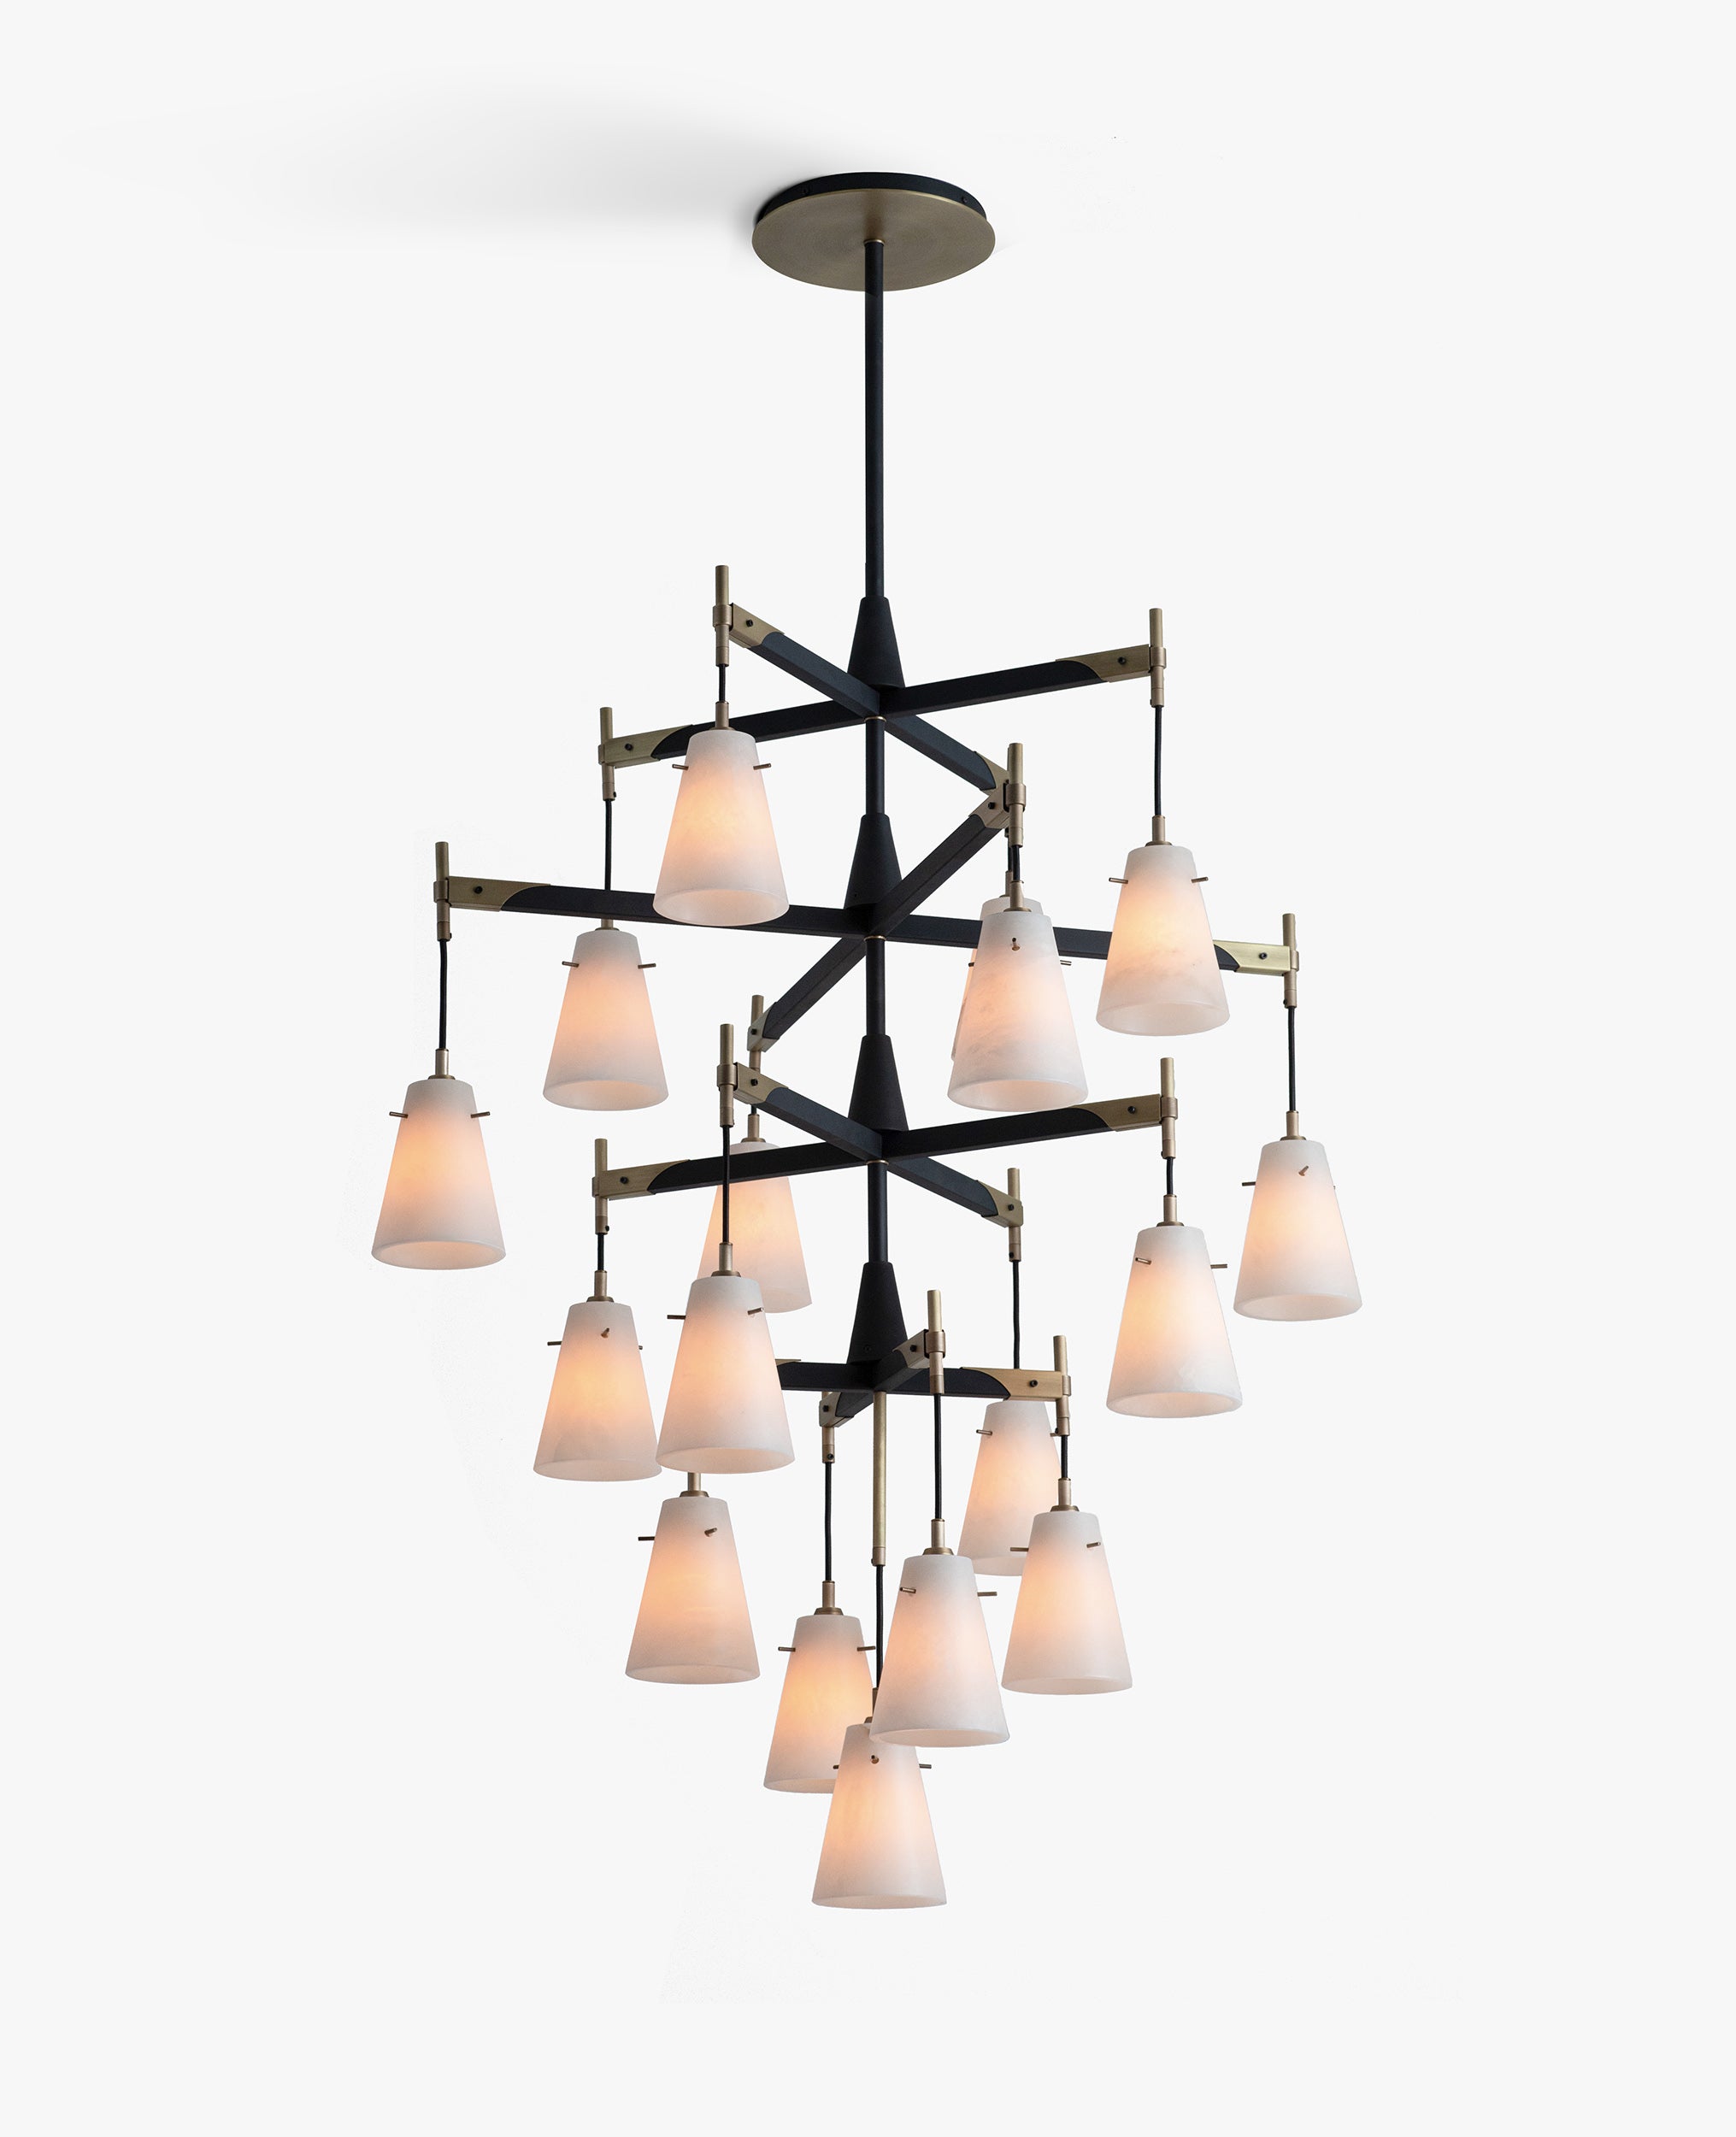 Patinated Steel with Light Antique Brass accents and Alabaster Shade